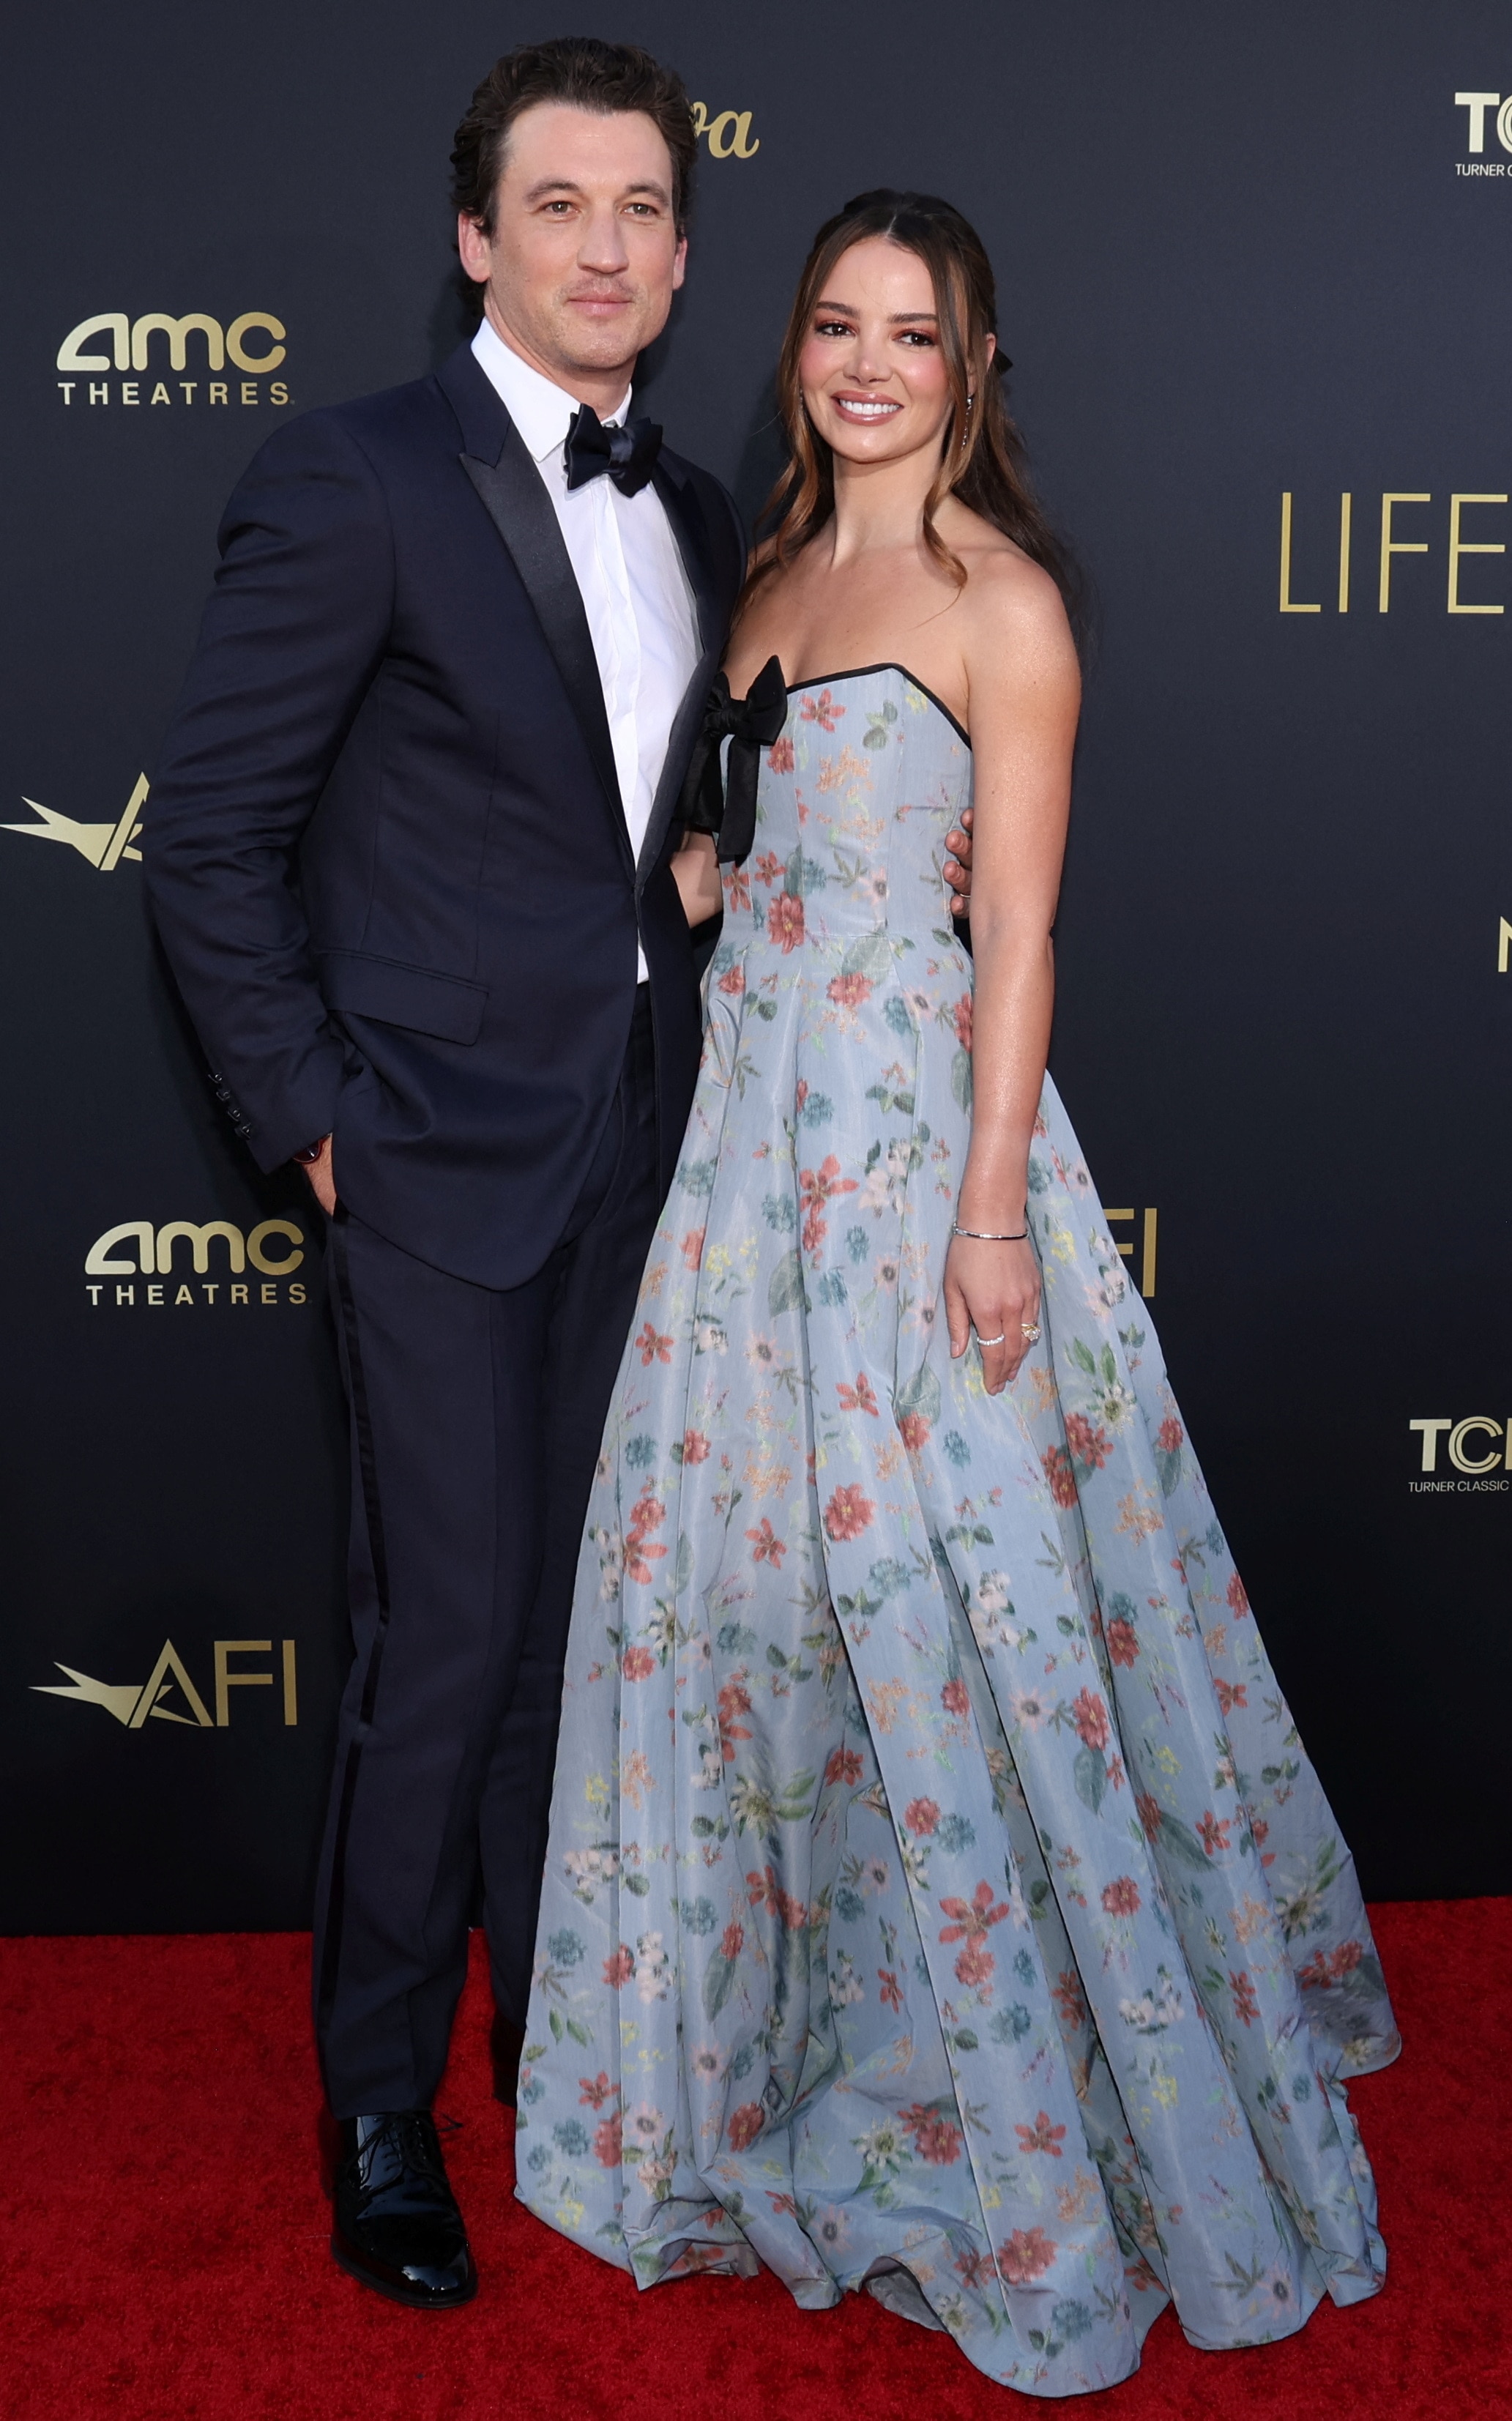 Miles Teller wearing a dark navy suit with a black bow tie and Keleigh Teller in a floral pastel blue strapless gown